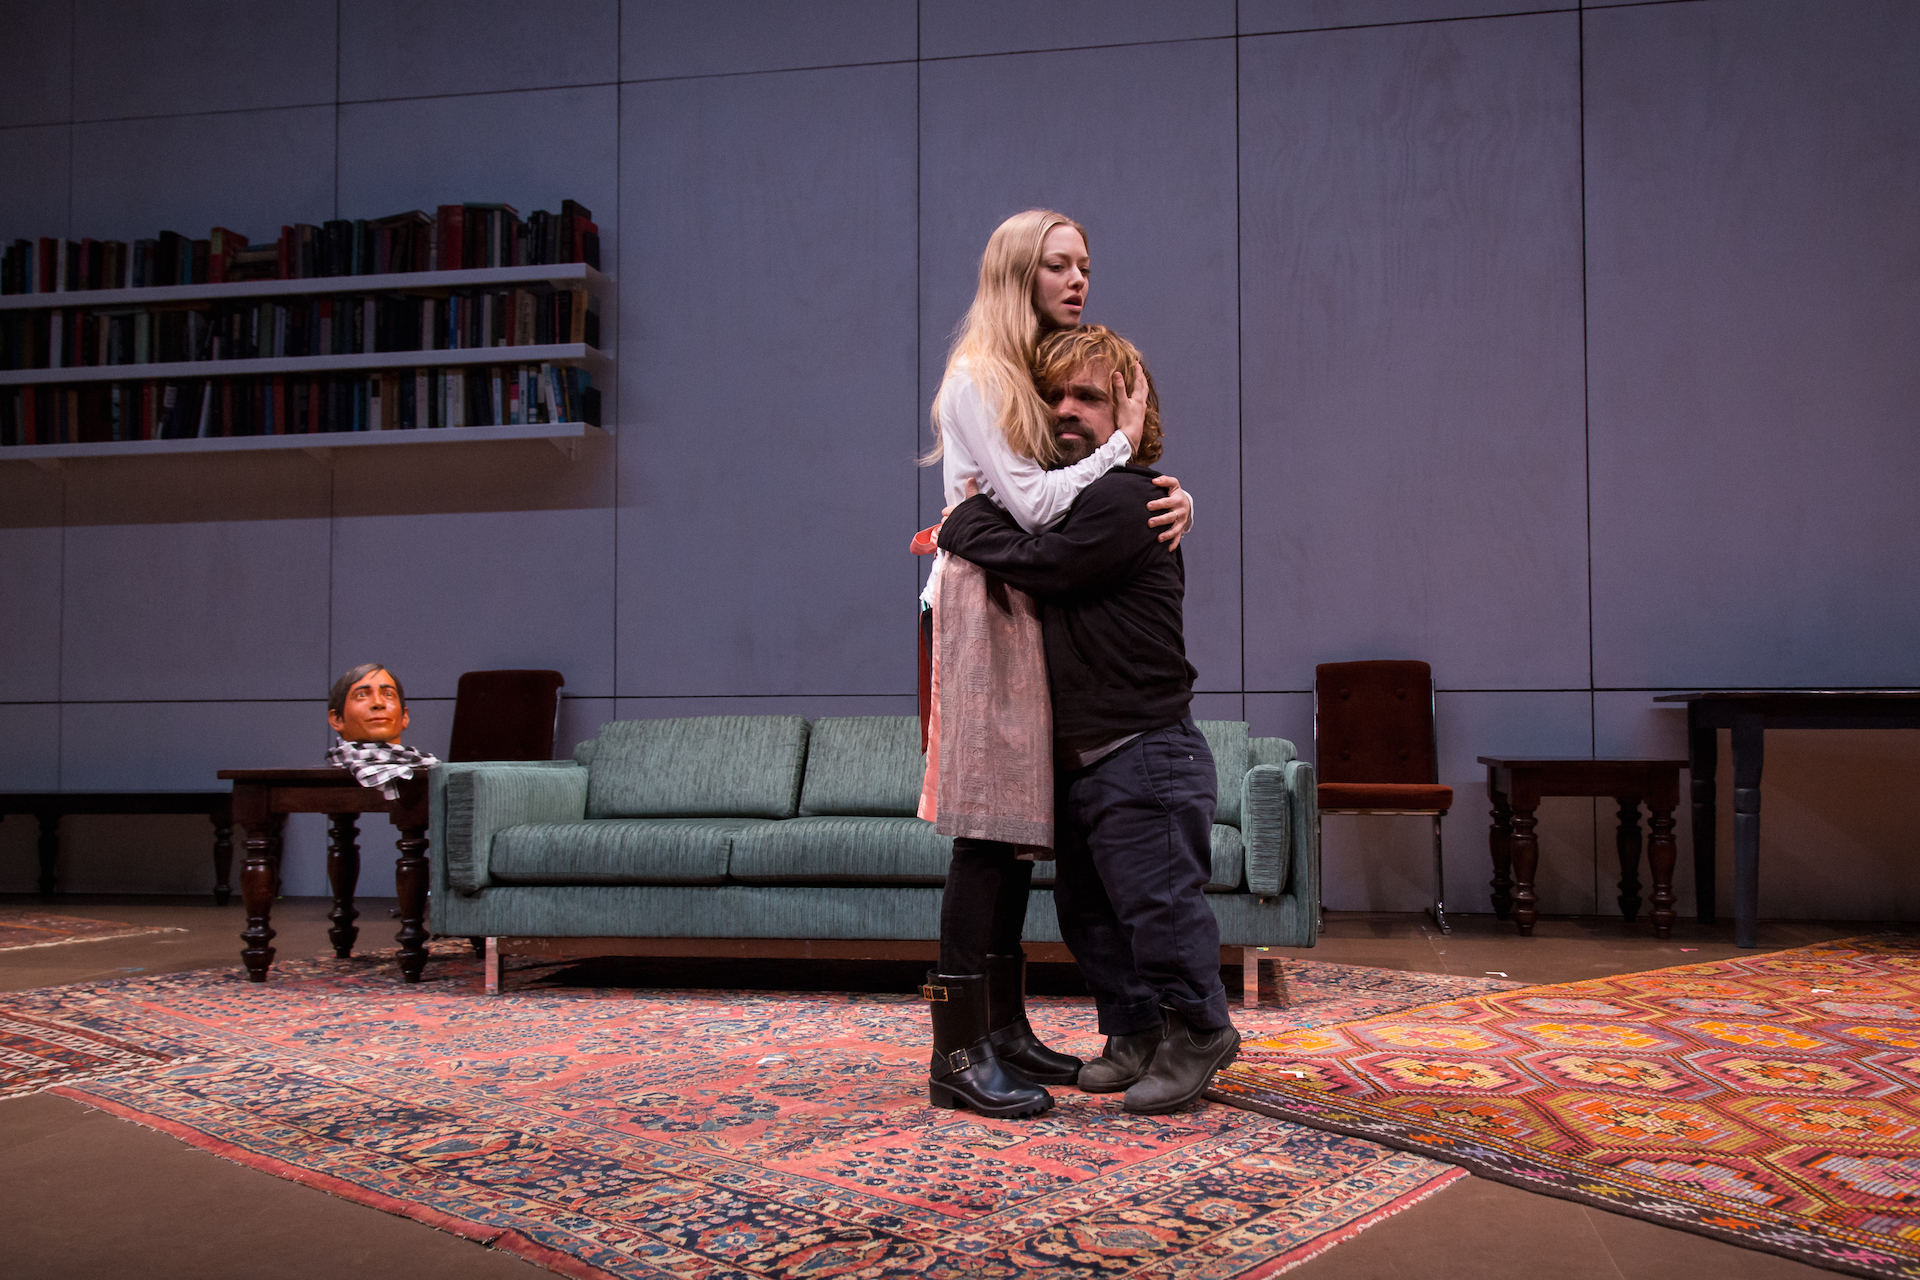 24 Hour Plays Rehearsals Amanda Seyfried and Peter Dinklage